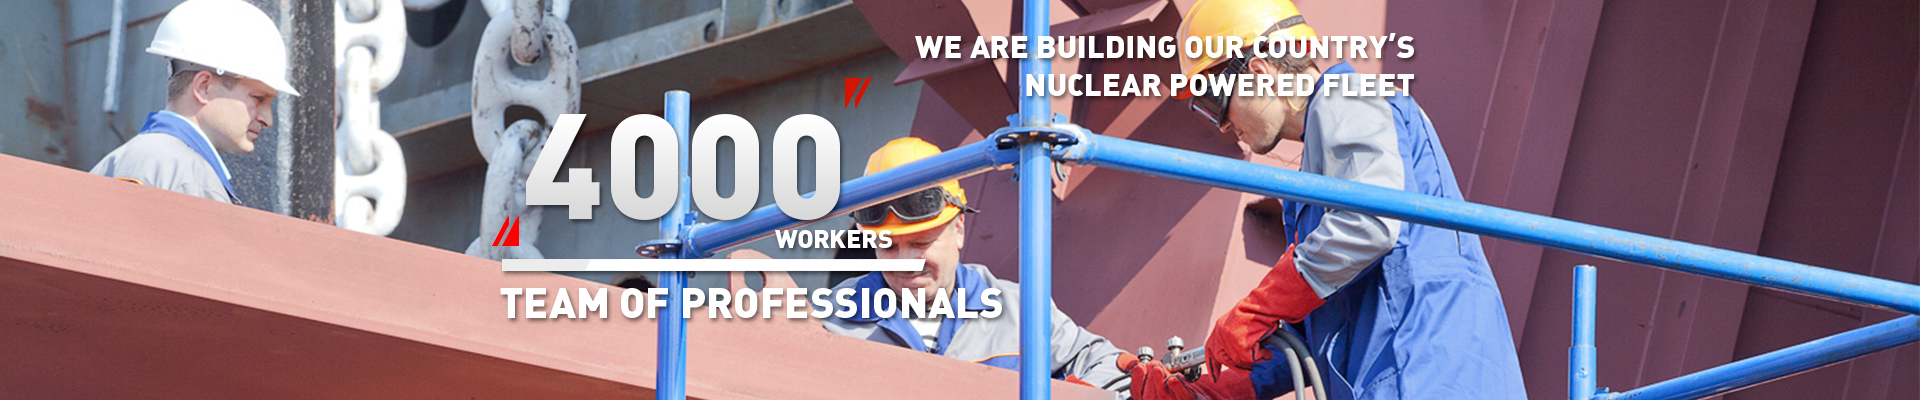 4000 workers team of professionals